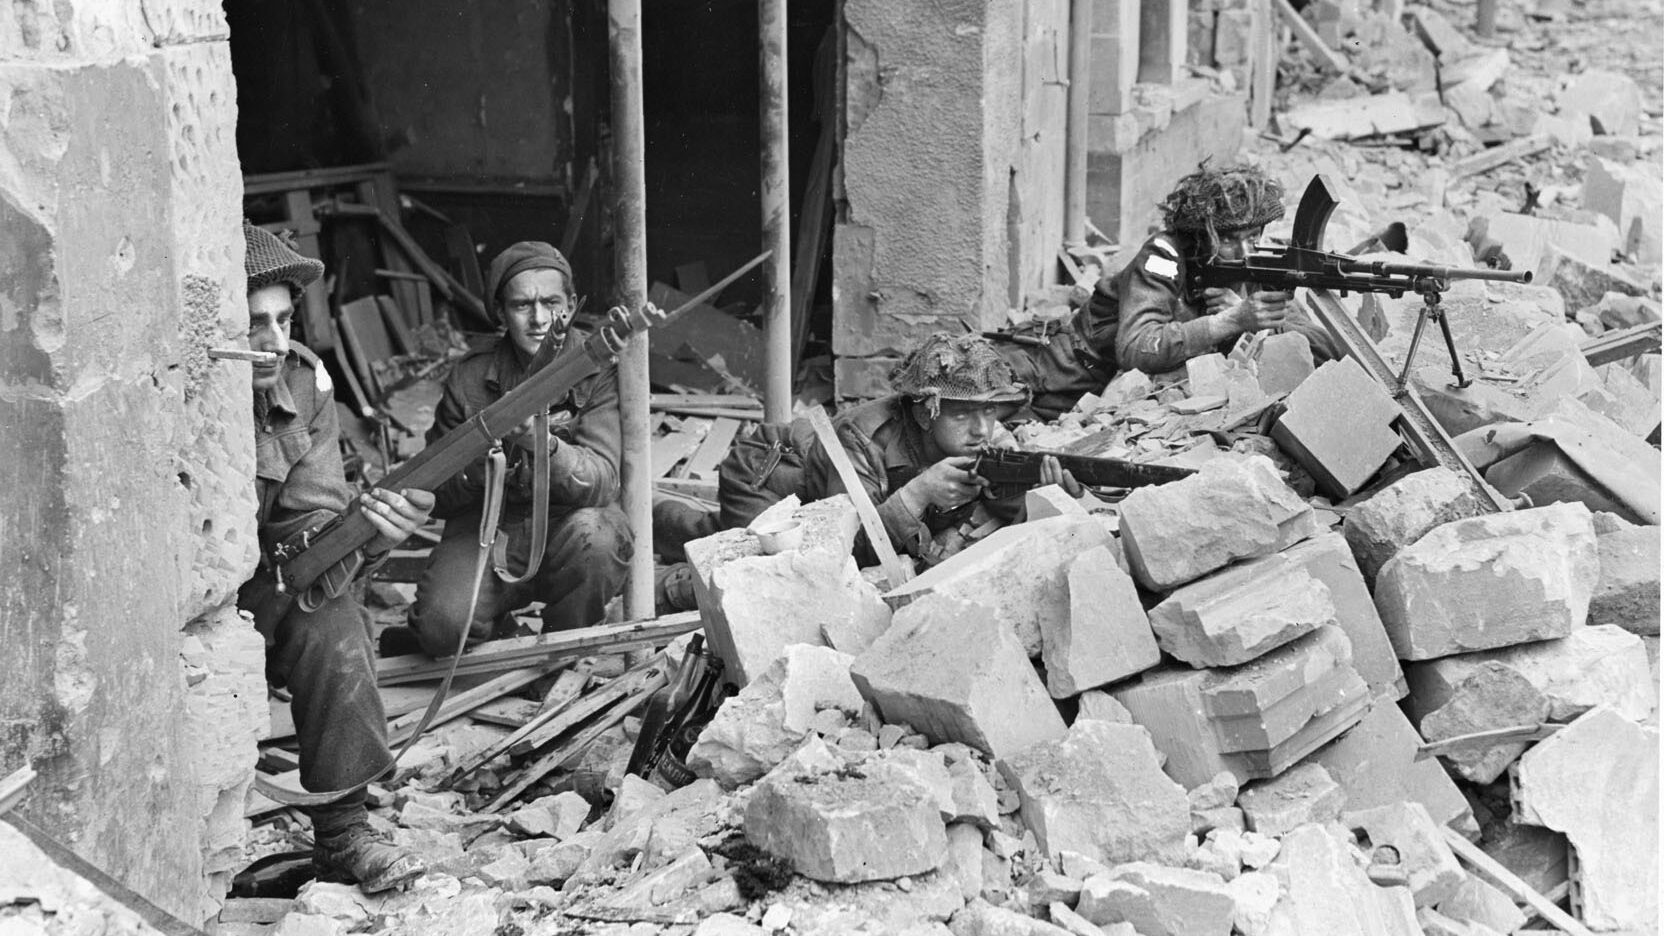 Fighting was intense in the towns and villages behind Juno Beach. Here, 3rd Canadian Infantry Division soldiers defend their position in a French town. Three of the soldiers are equipped with Lee Enfield Mk I rifles while the soldier at right is firing a Bren .303 Mk II machine gun.